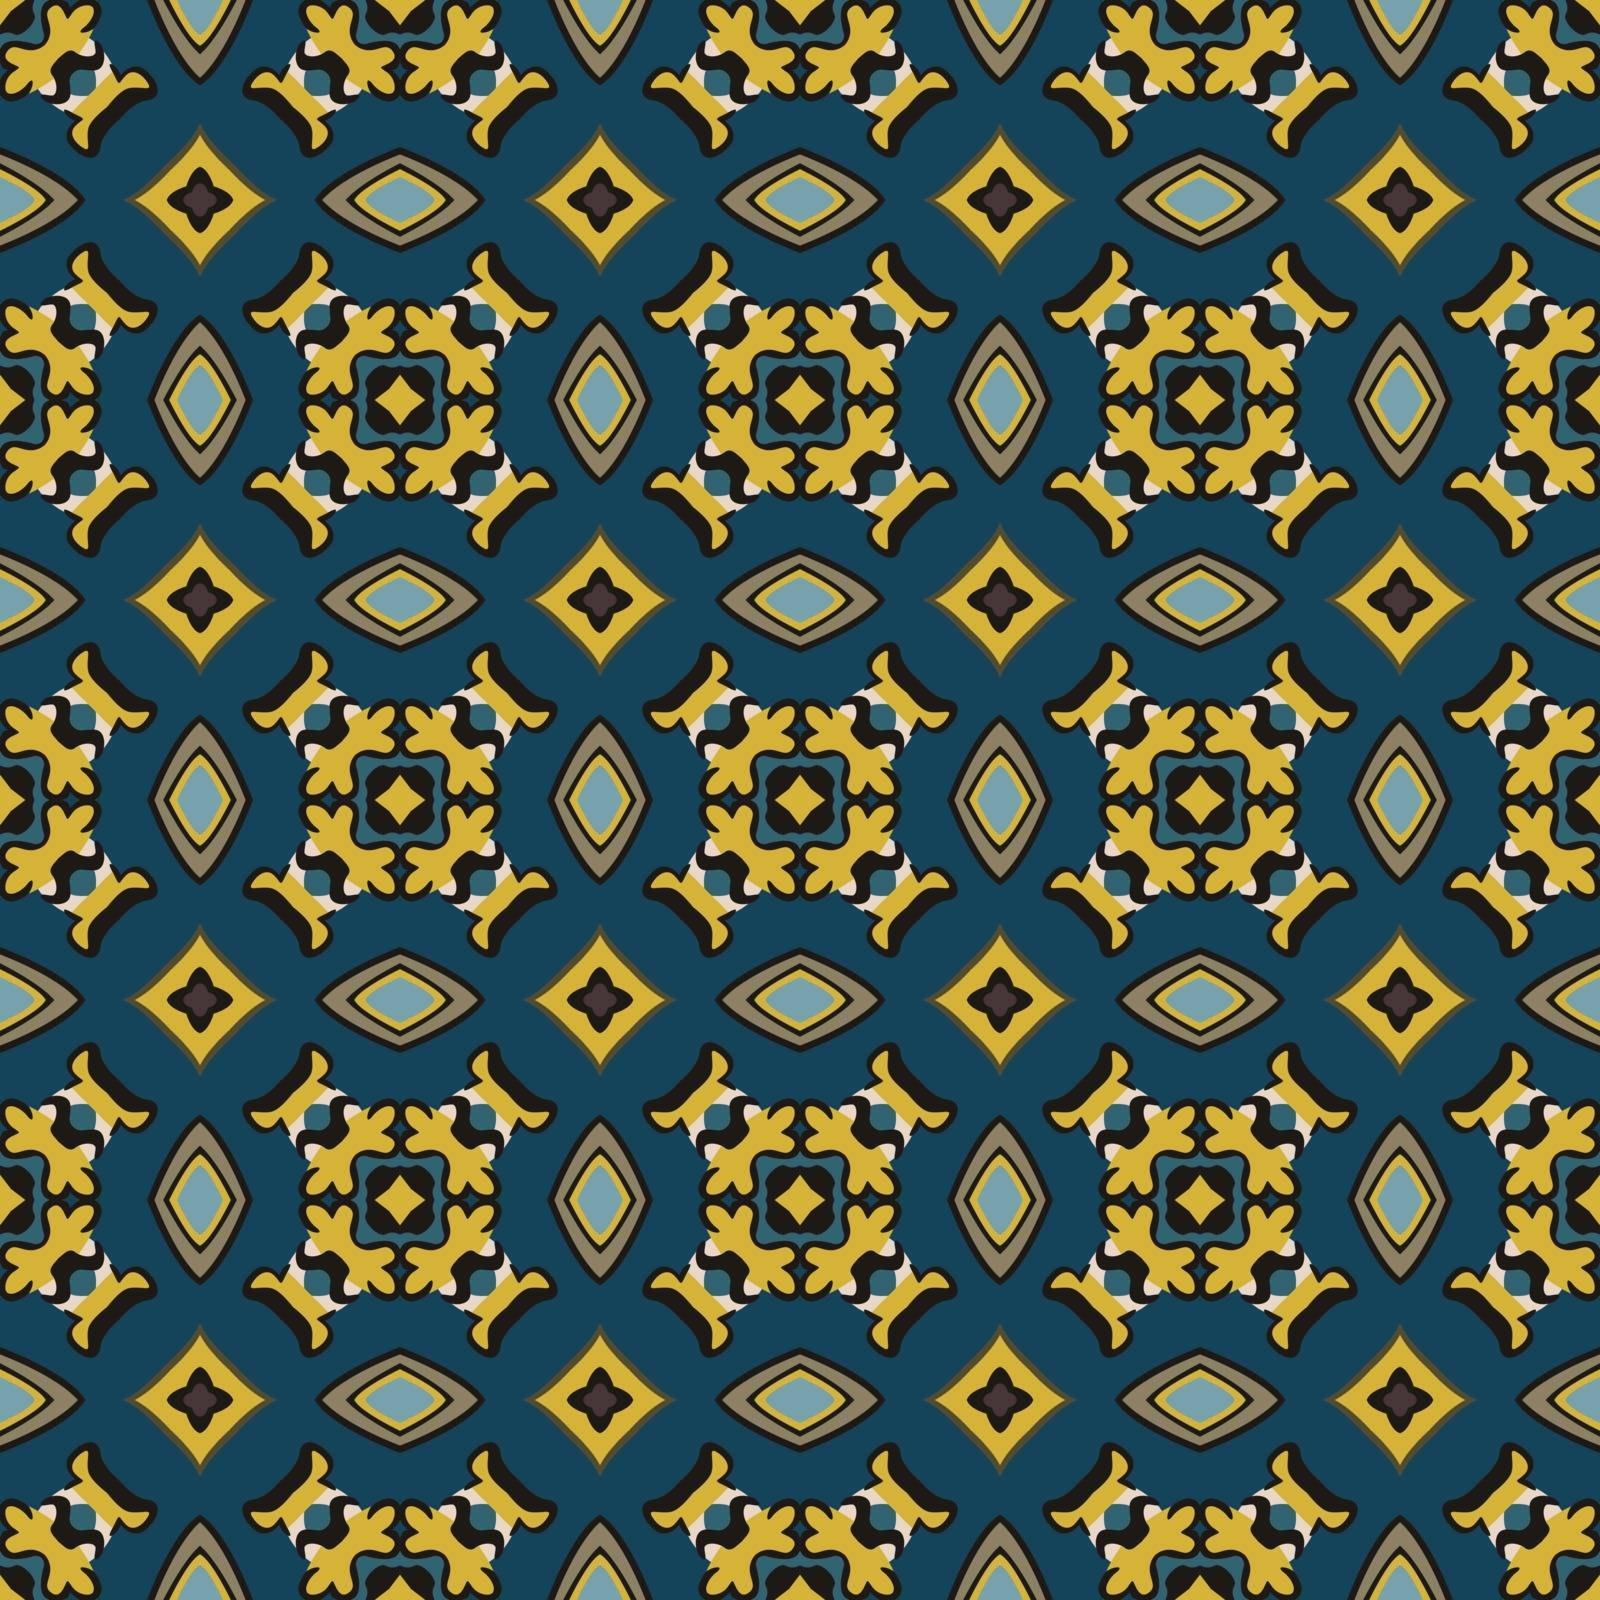 Seamless illustrated pattern made of abstract elements in beige, yellow, blue, gray and black